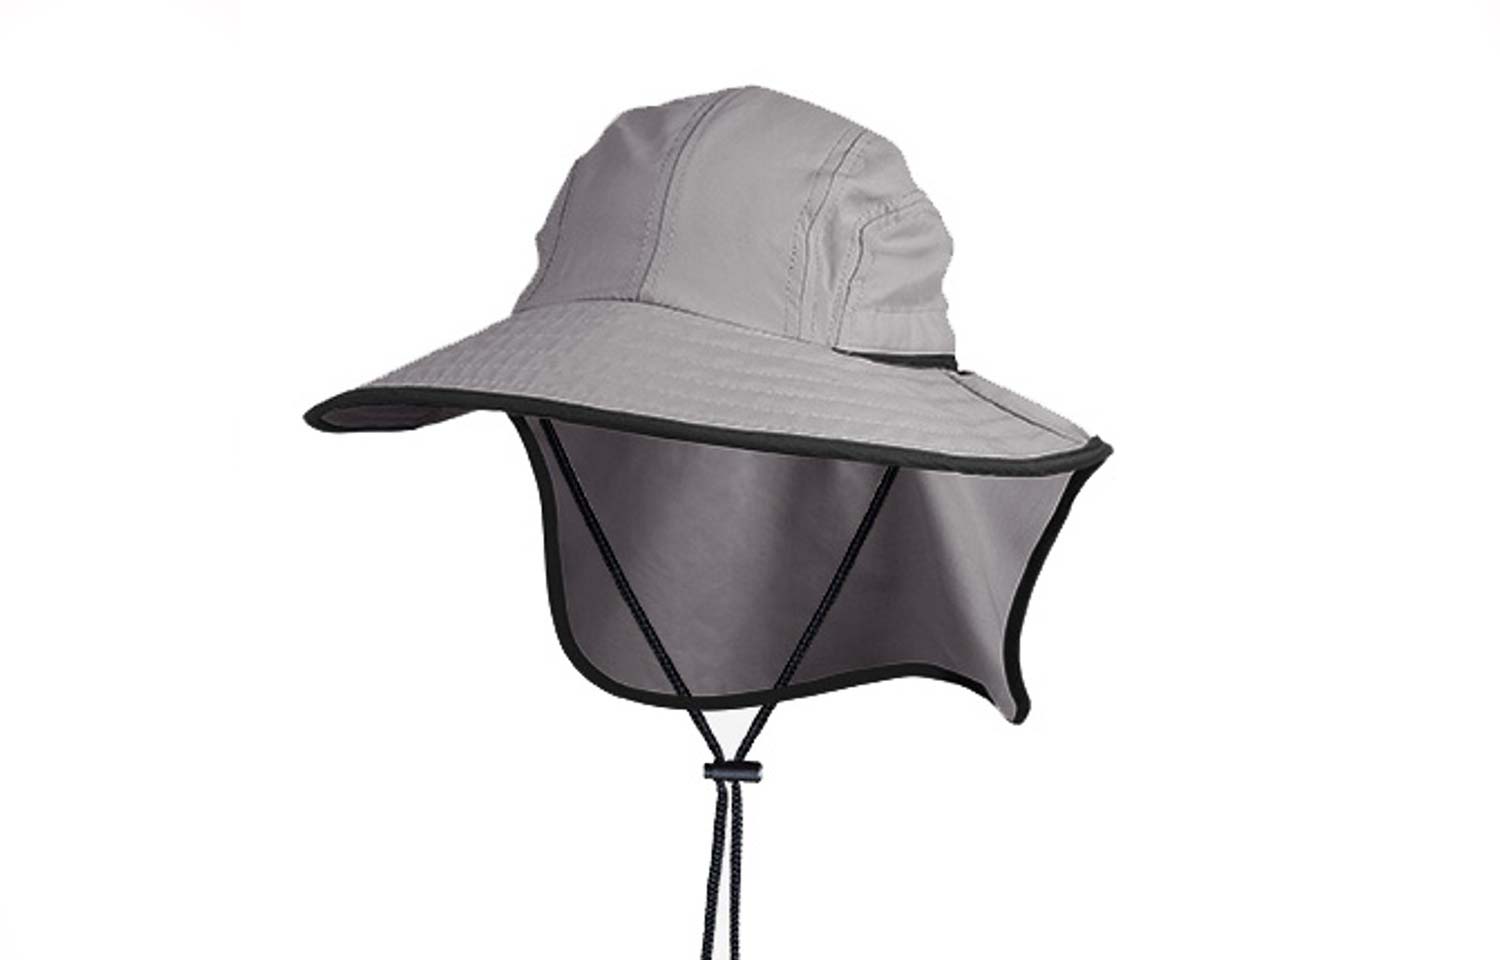 Flap Hat - this is Silver